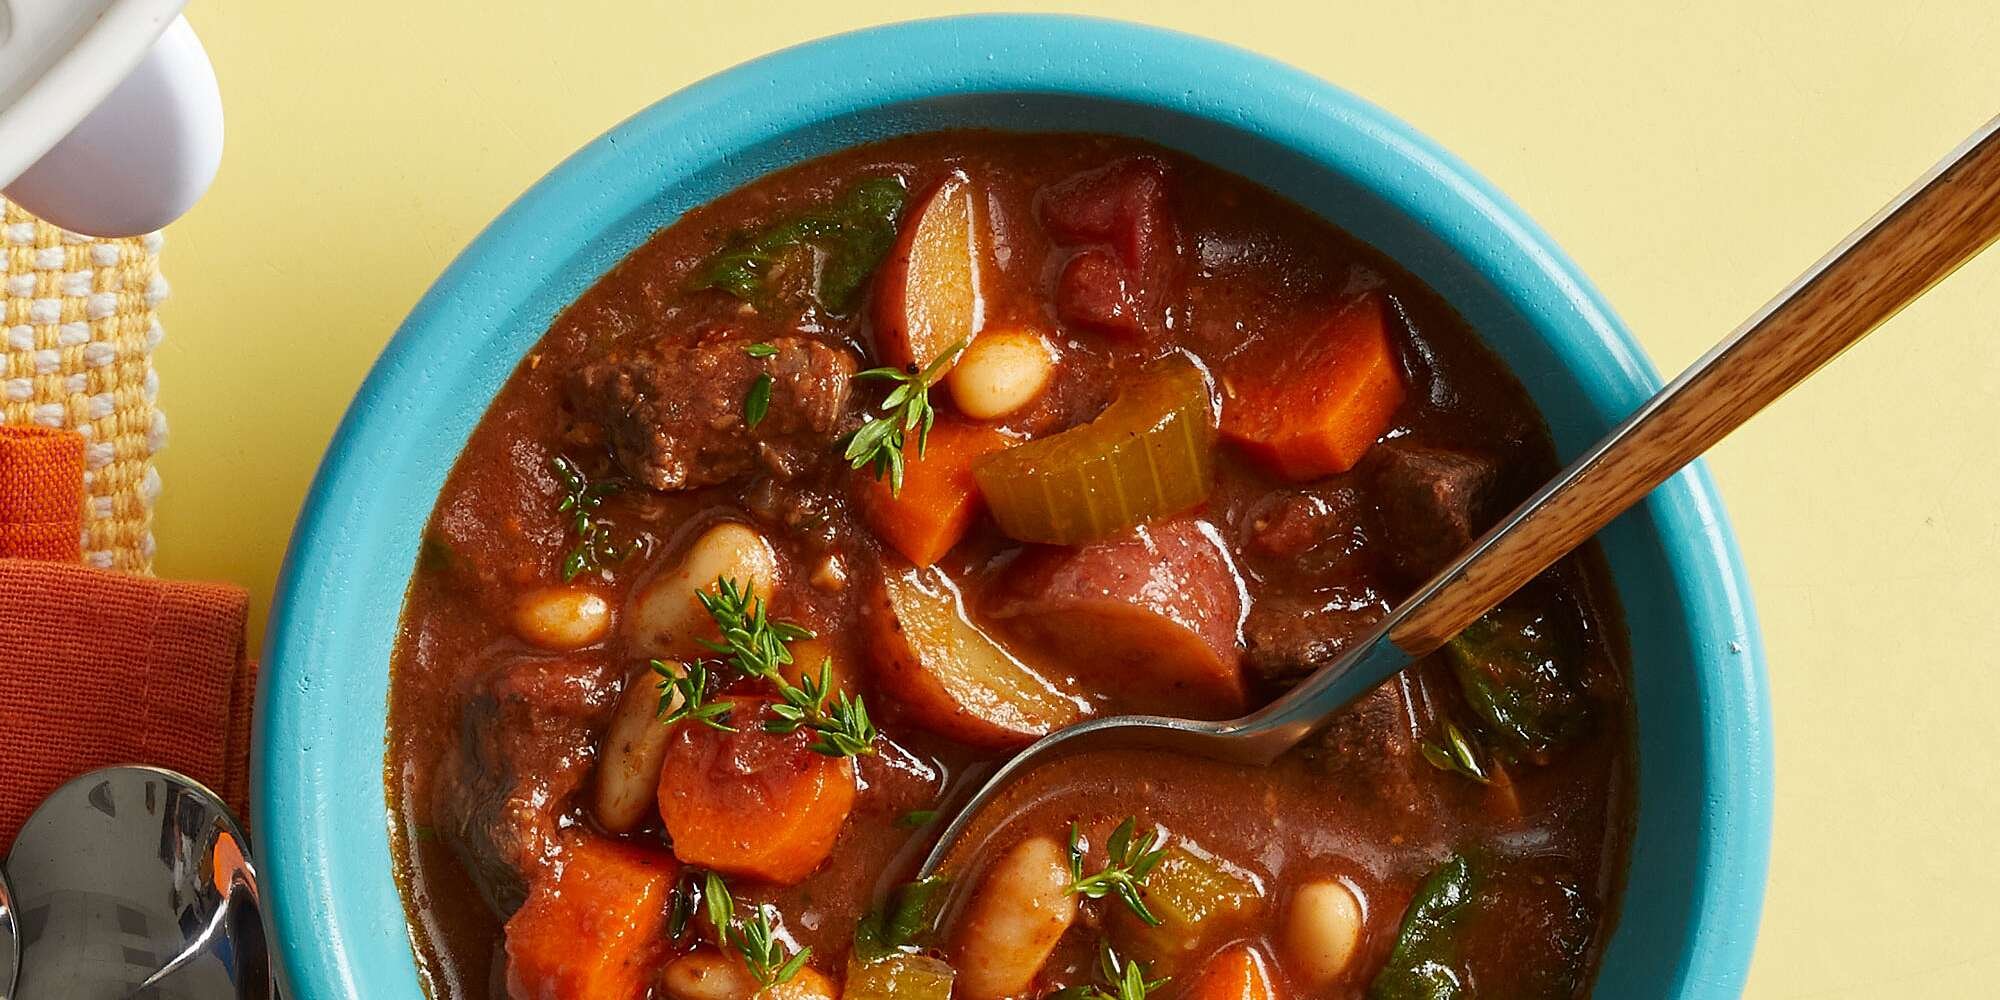 Slow-Cooker Beef Stew with Garlic, Herbs & Cannellini Beans